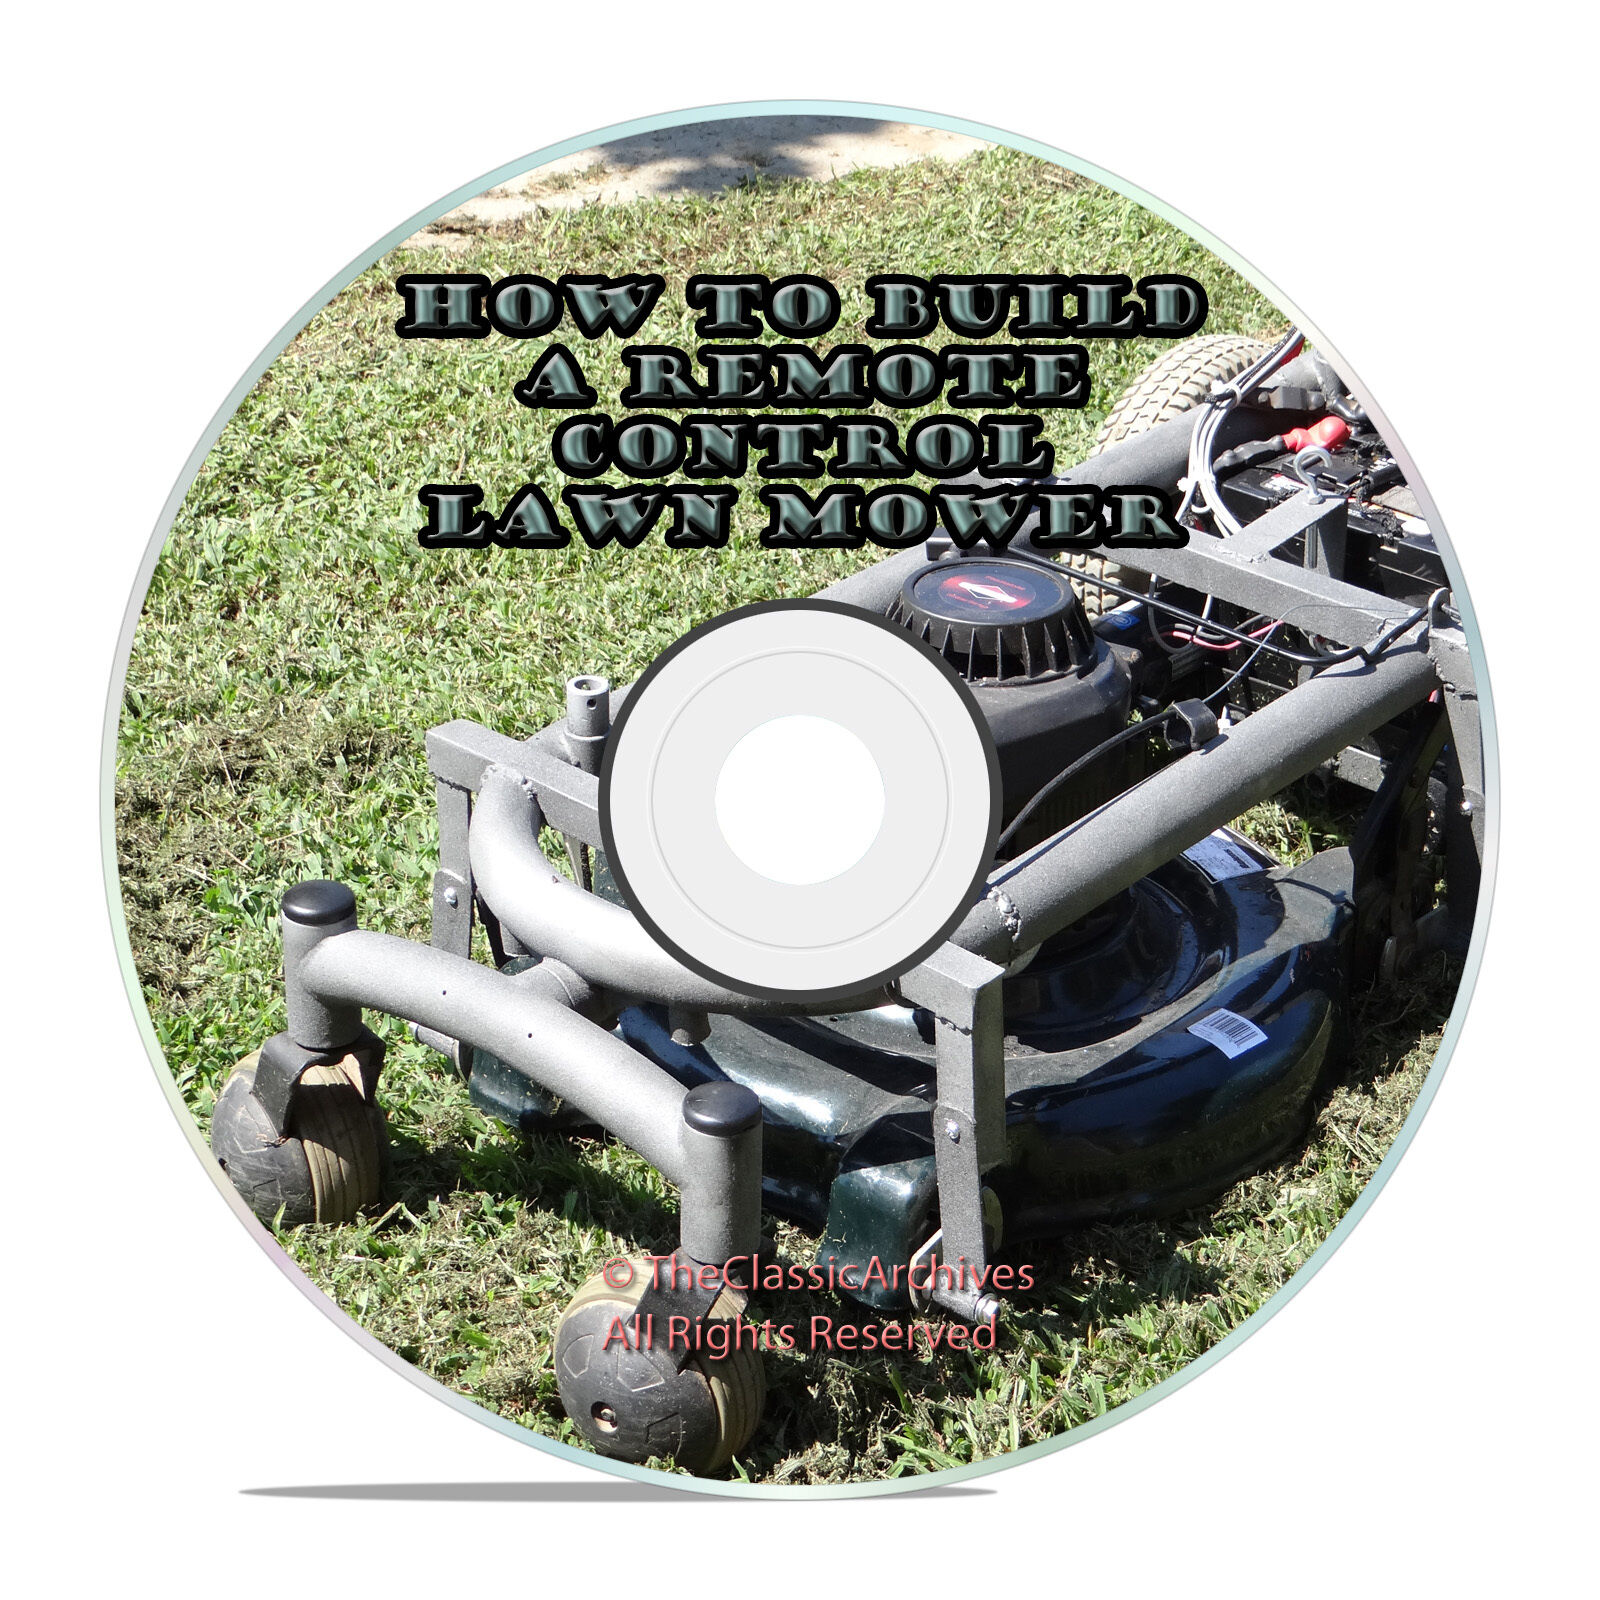 How To Build A Remote Control Lawn Mower, PDF Plans and Videos, Instructions